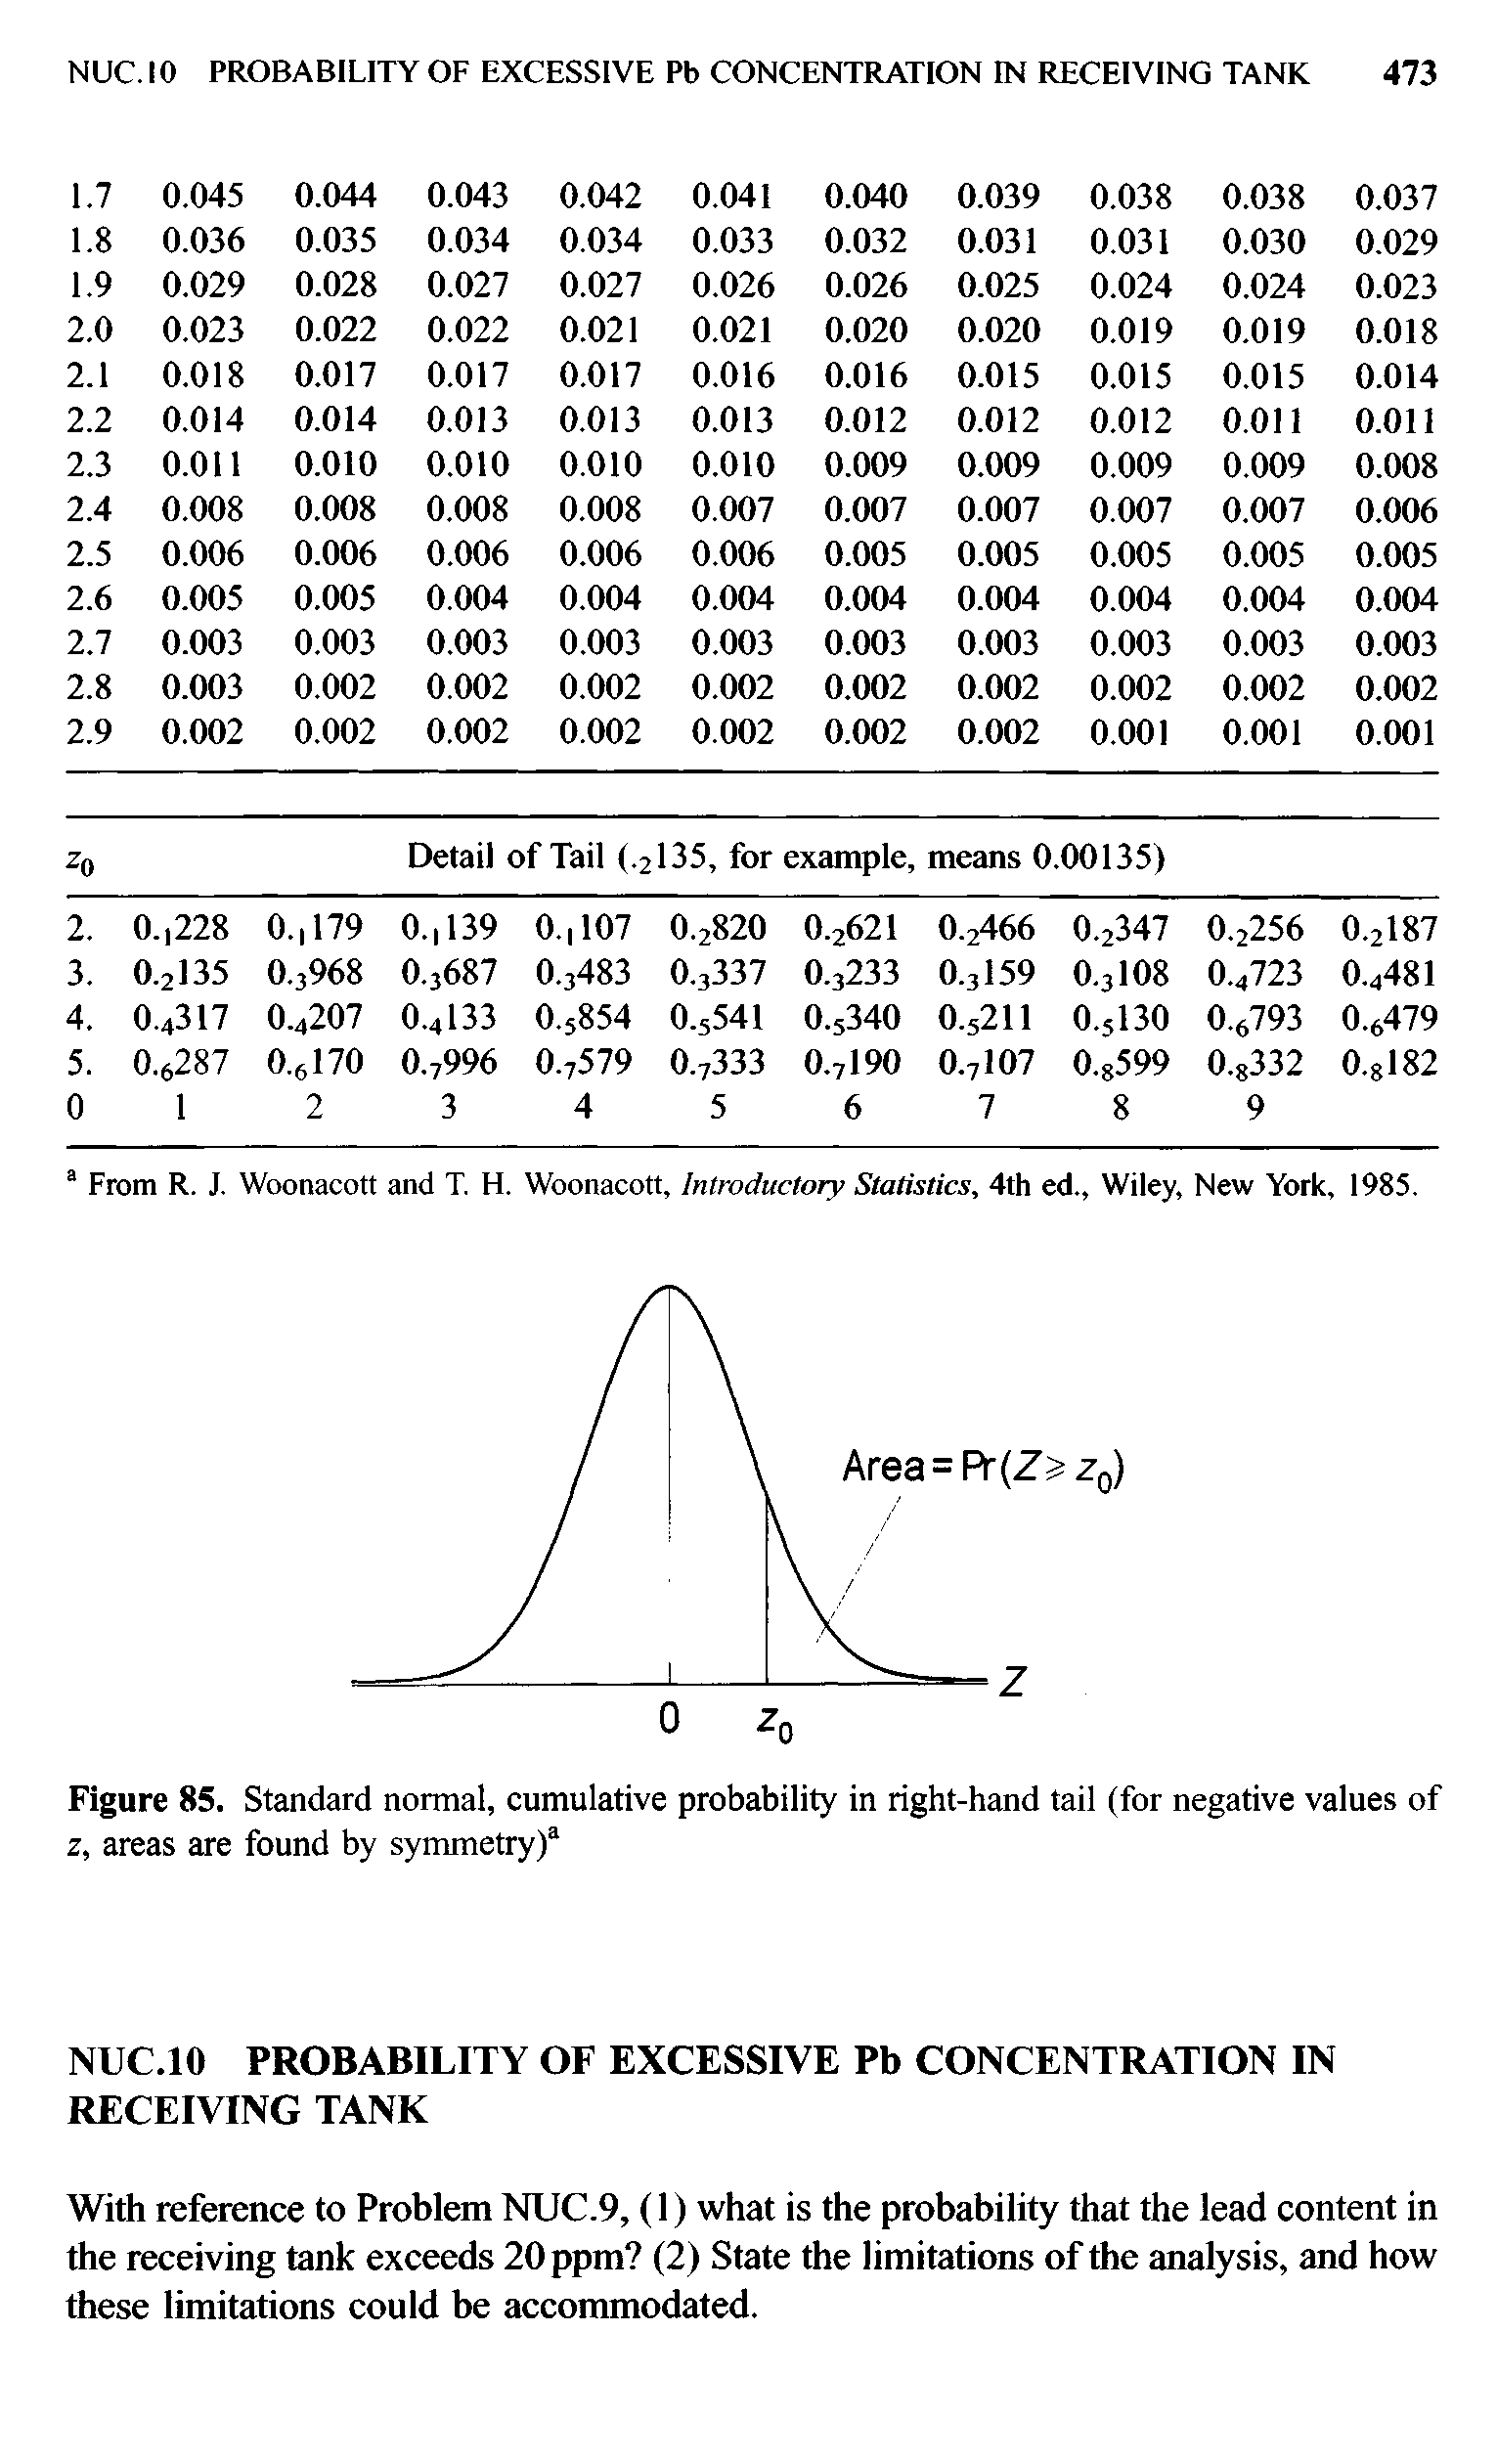 Figure 85. Standard normal, cumulative probability in right-hand tail (for negative values of z, areas are found by symmetry) ...